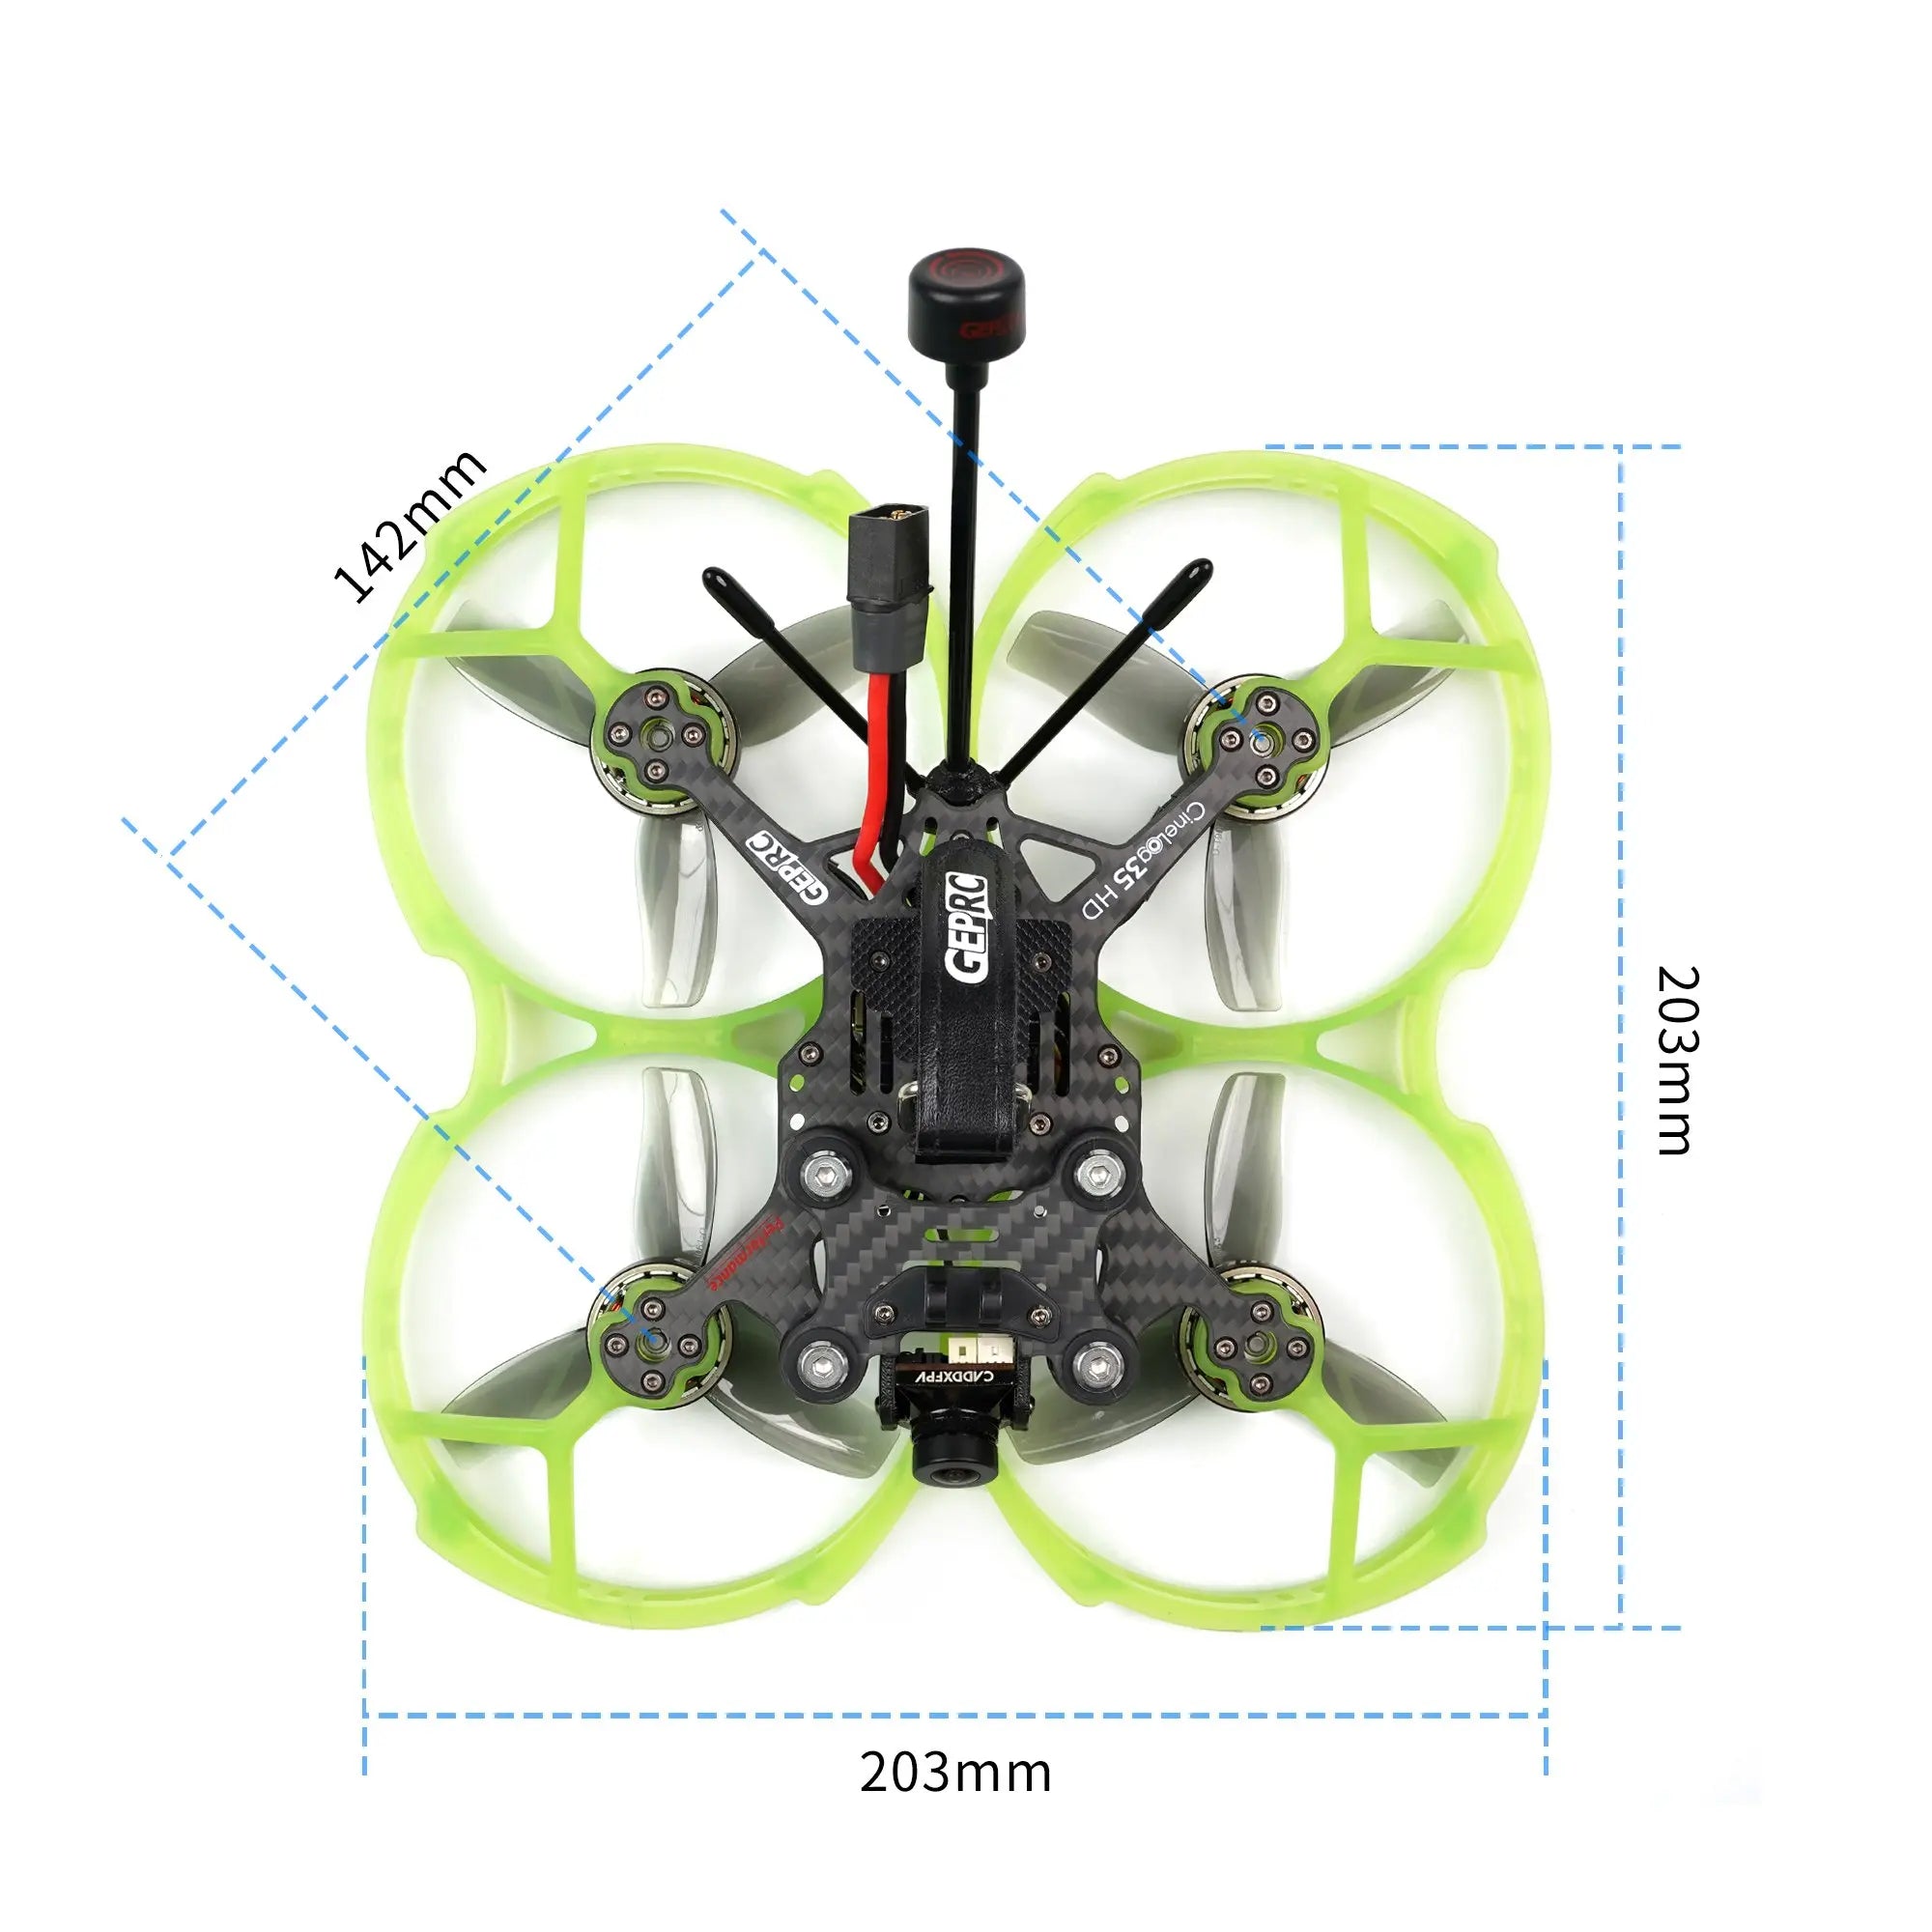 GEPRC CineLog35 Cinewhoop FPV Drone, You can even Freestyle with GEPRC Naked Hero 8 Camera .